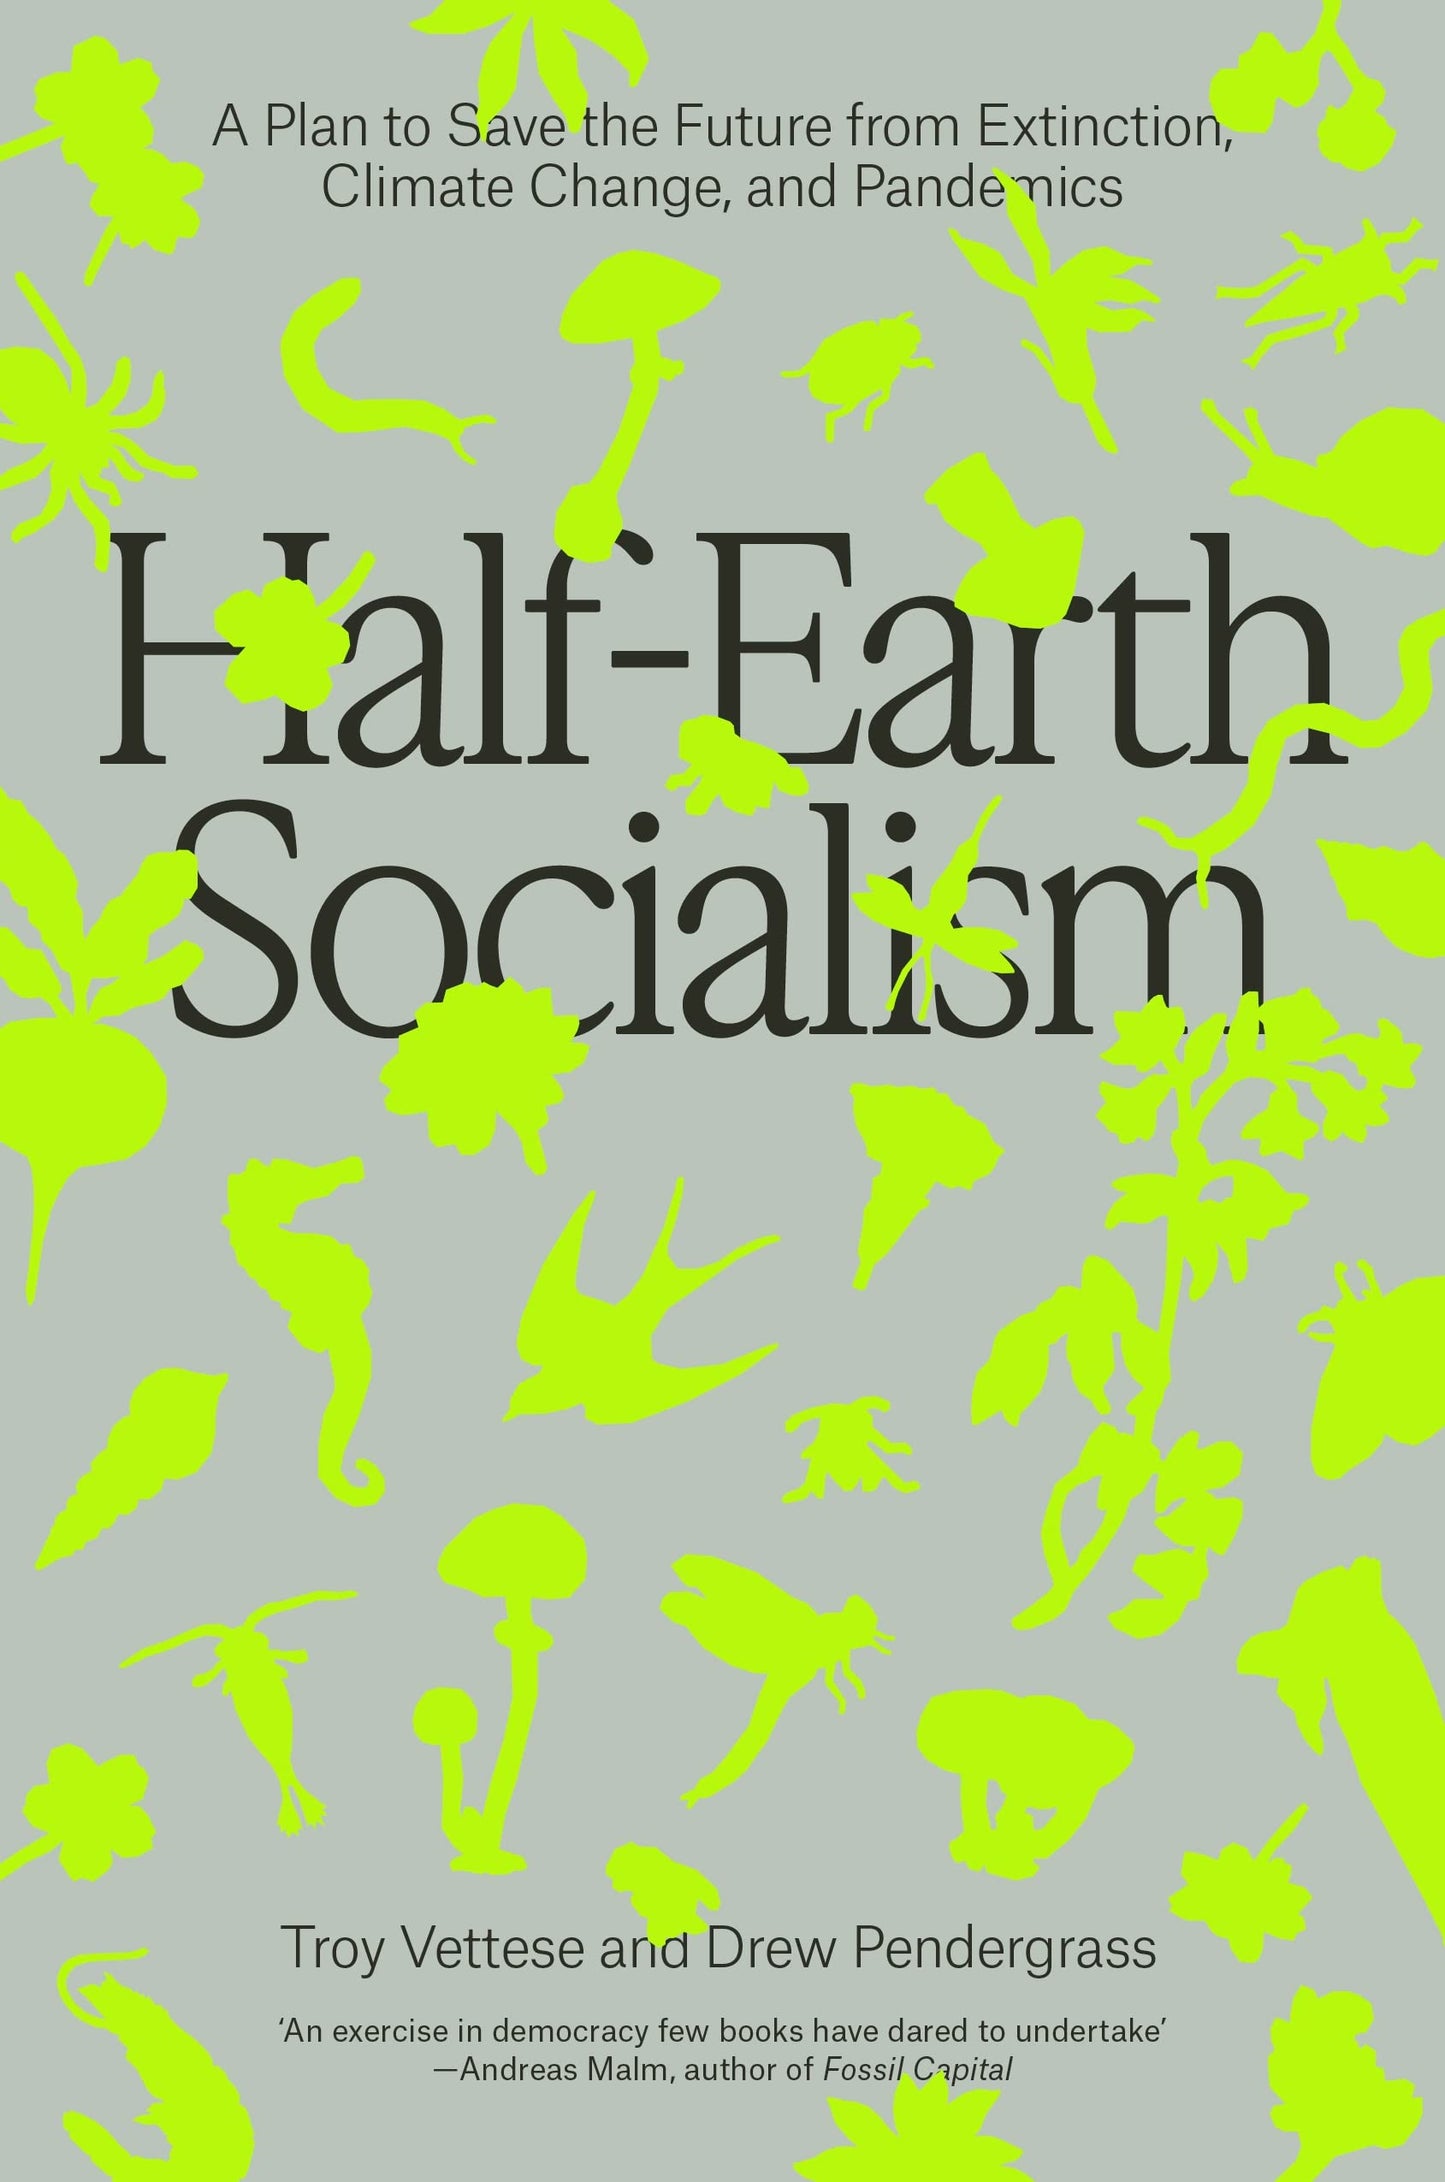 Half-Earth Socialism, by Troy Vettese and Drew Pendergrass